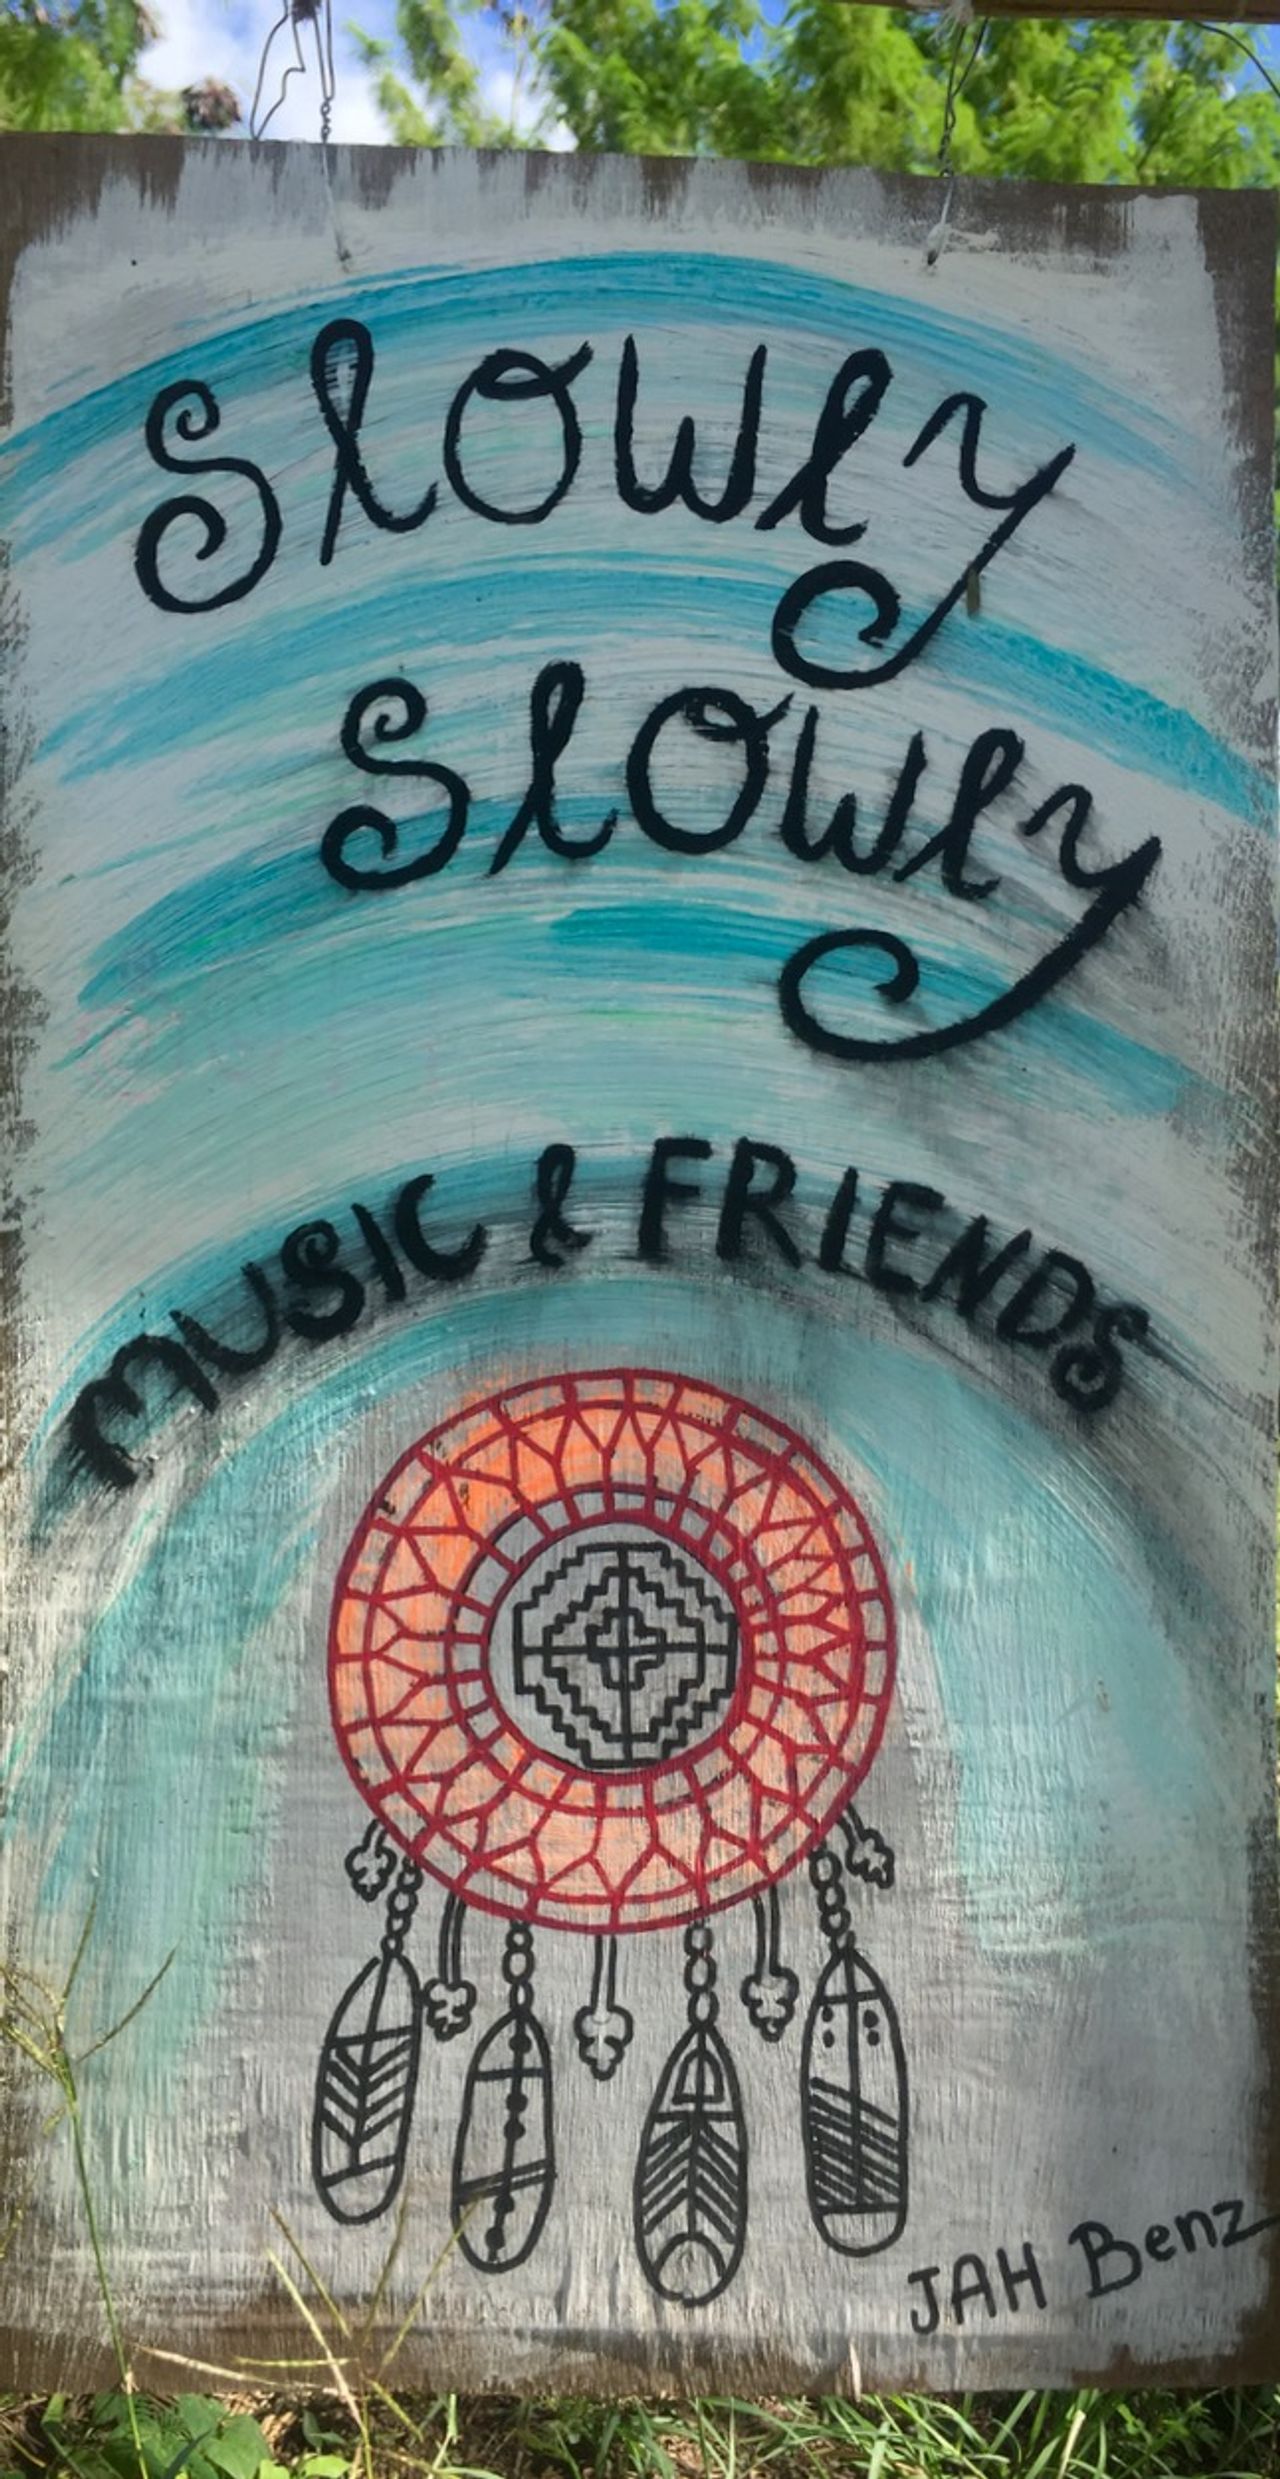 Painting that reads "Slowly, slowly. Music and friends"